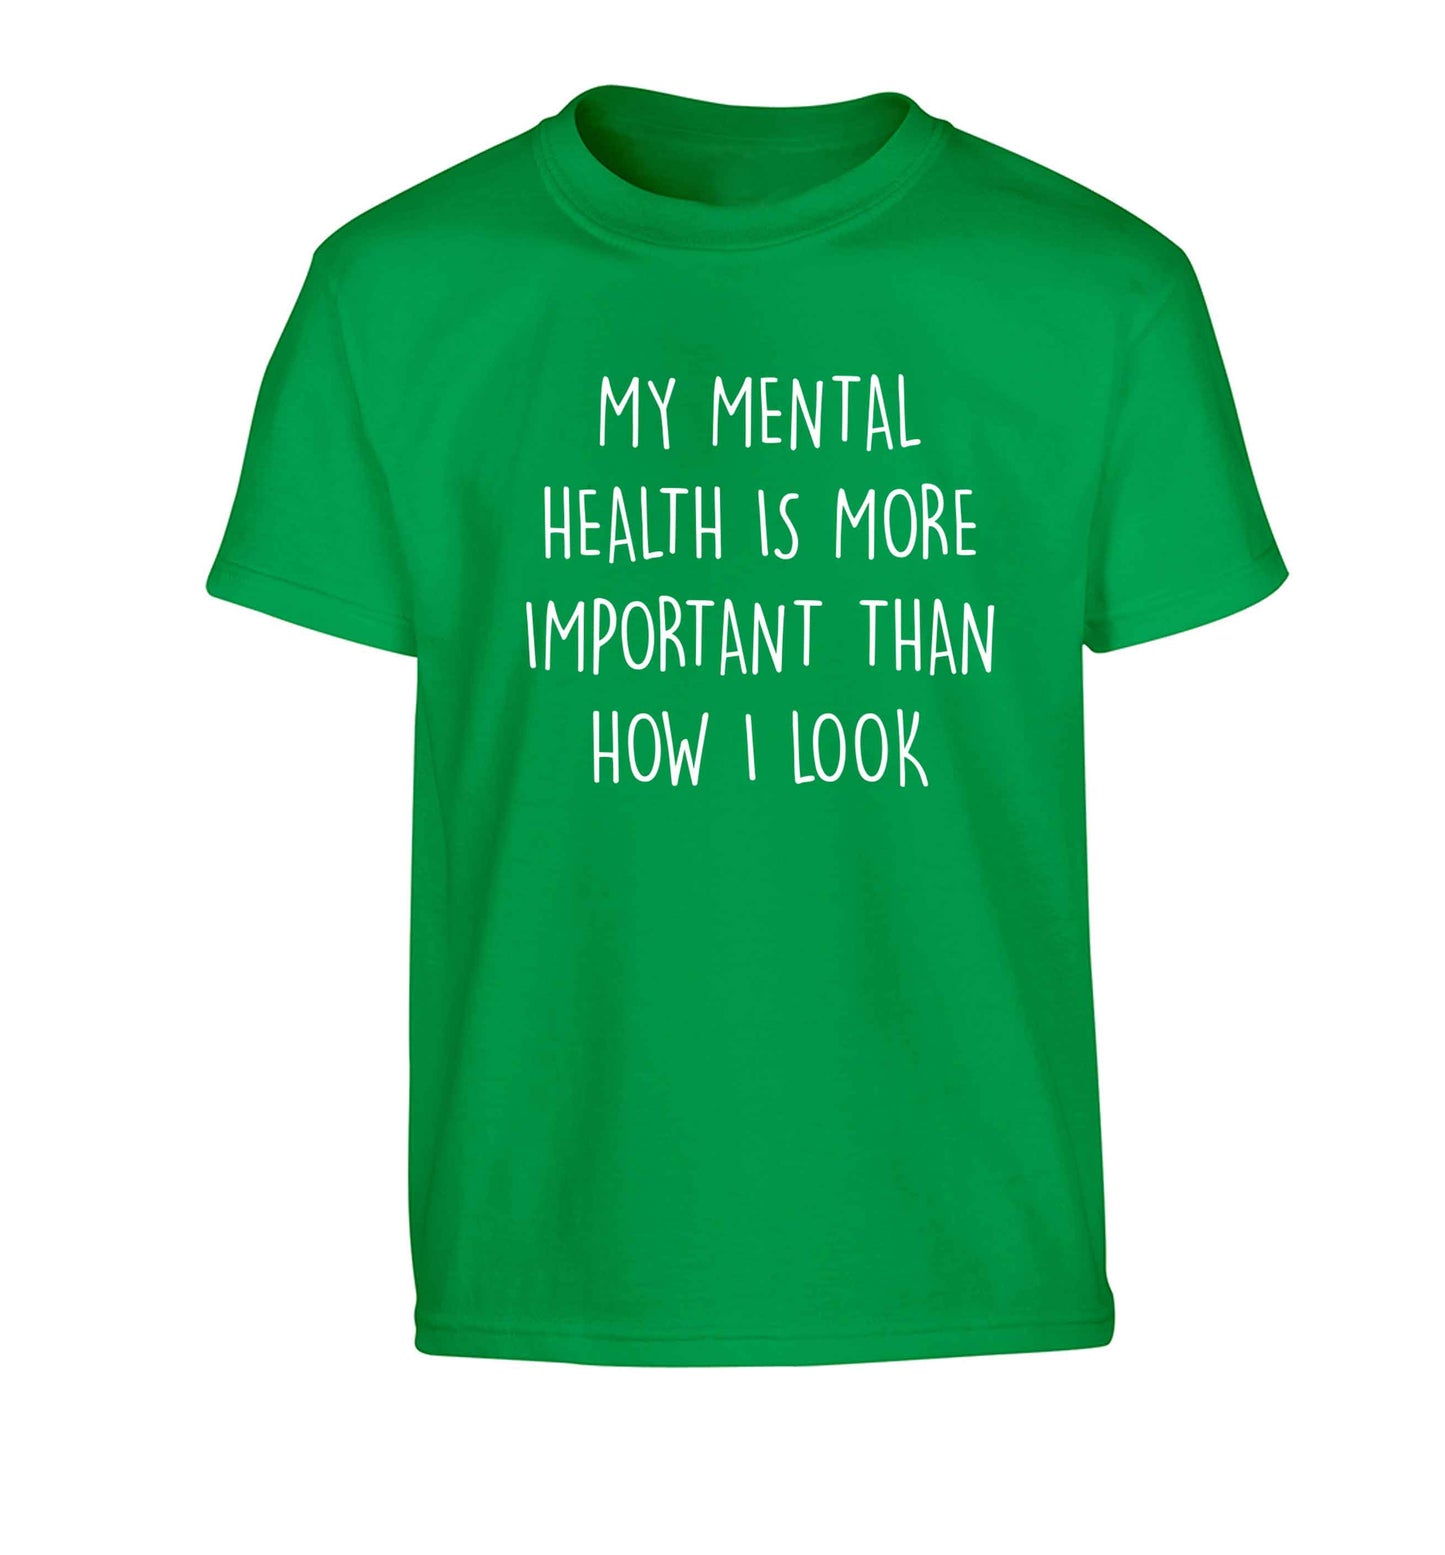 My mental health is more importnat than how I look Children's green Tshirt 12-13 Years